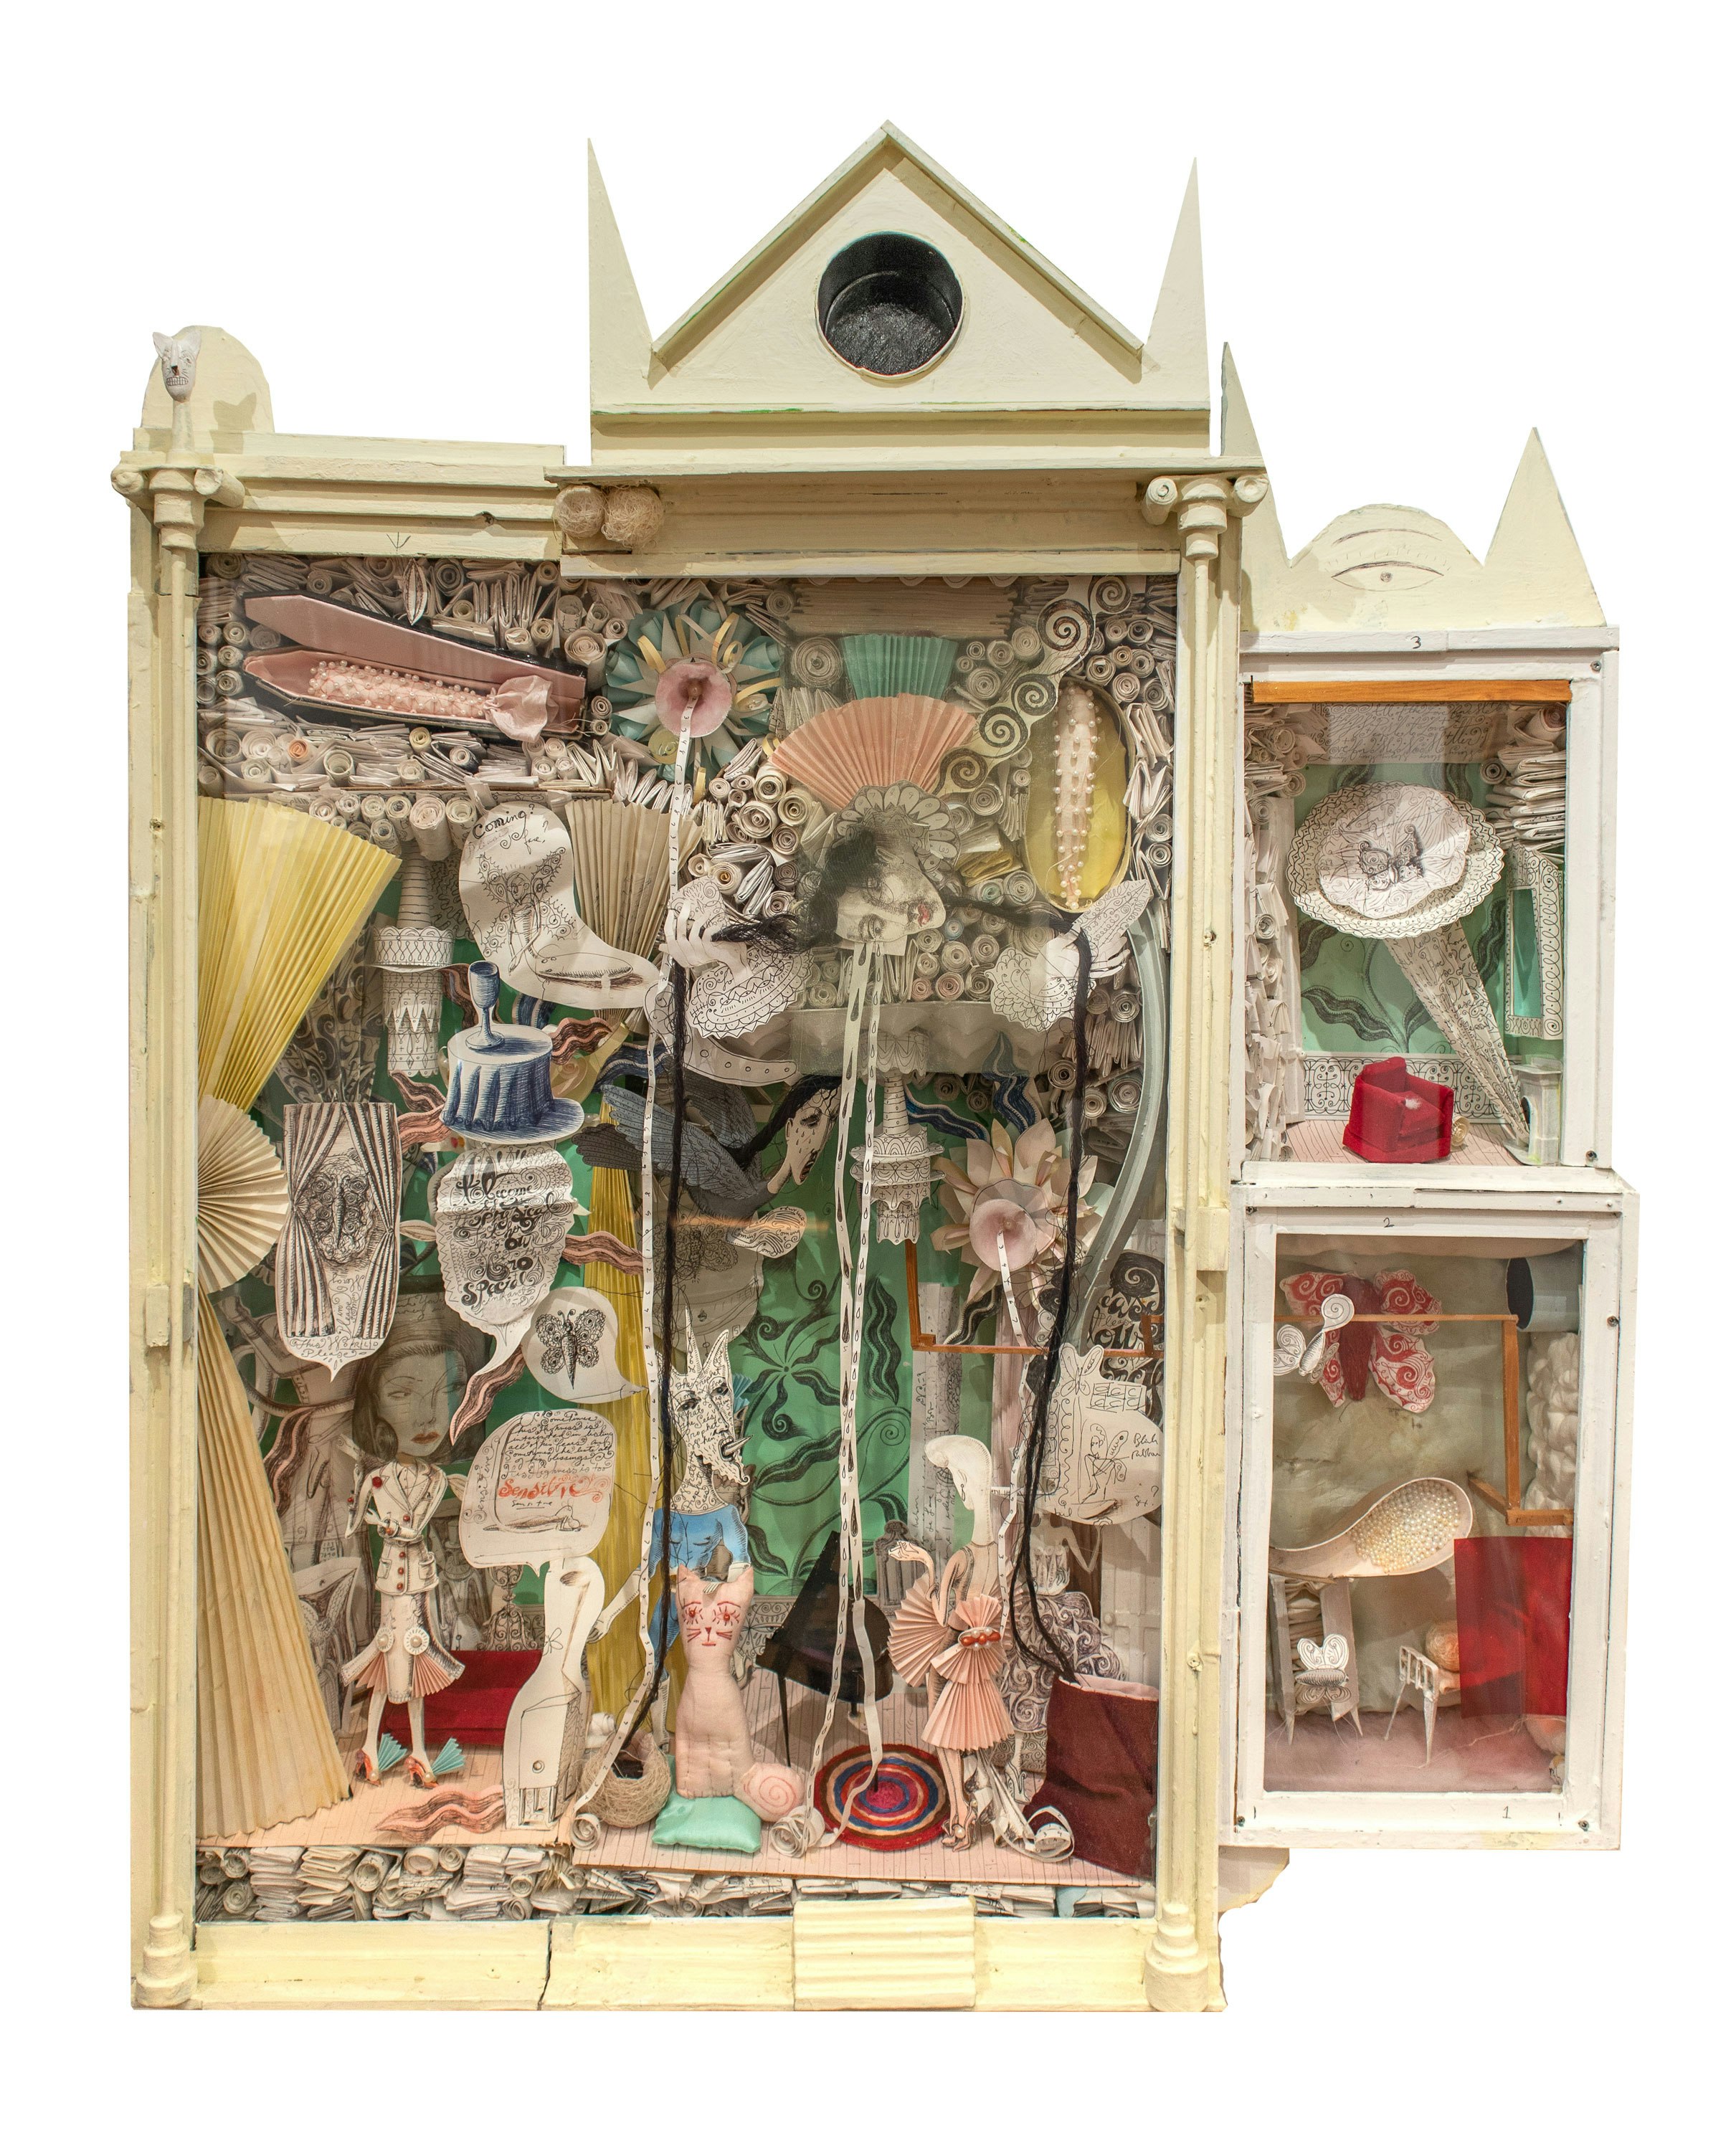 Mike Goodlett, Untitled, 2001–07. Wood, glass, paper, ballpoint pen, 40 x 32 x 9 inches. Collection of Jim Gray. Courtesy Institute 193.